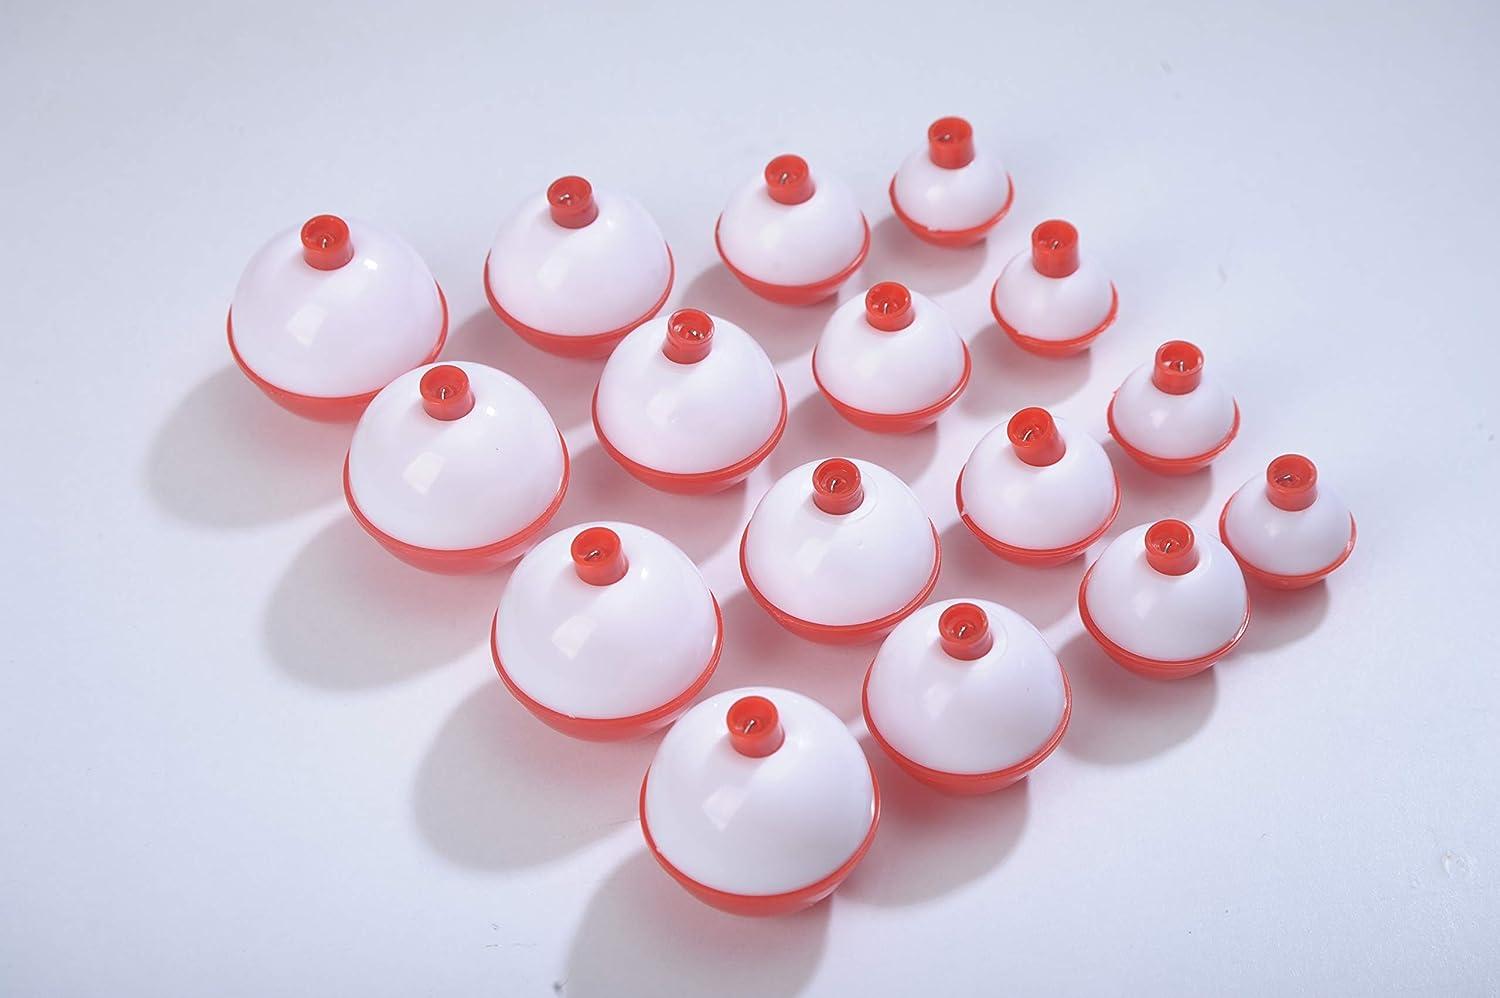 WUYUEJXI Fishing Bobbers Assortment, Large & Small Red and White